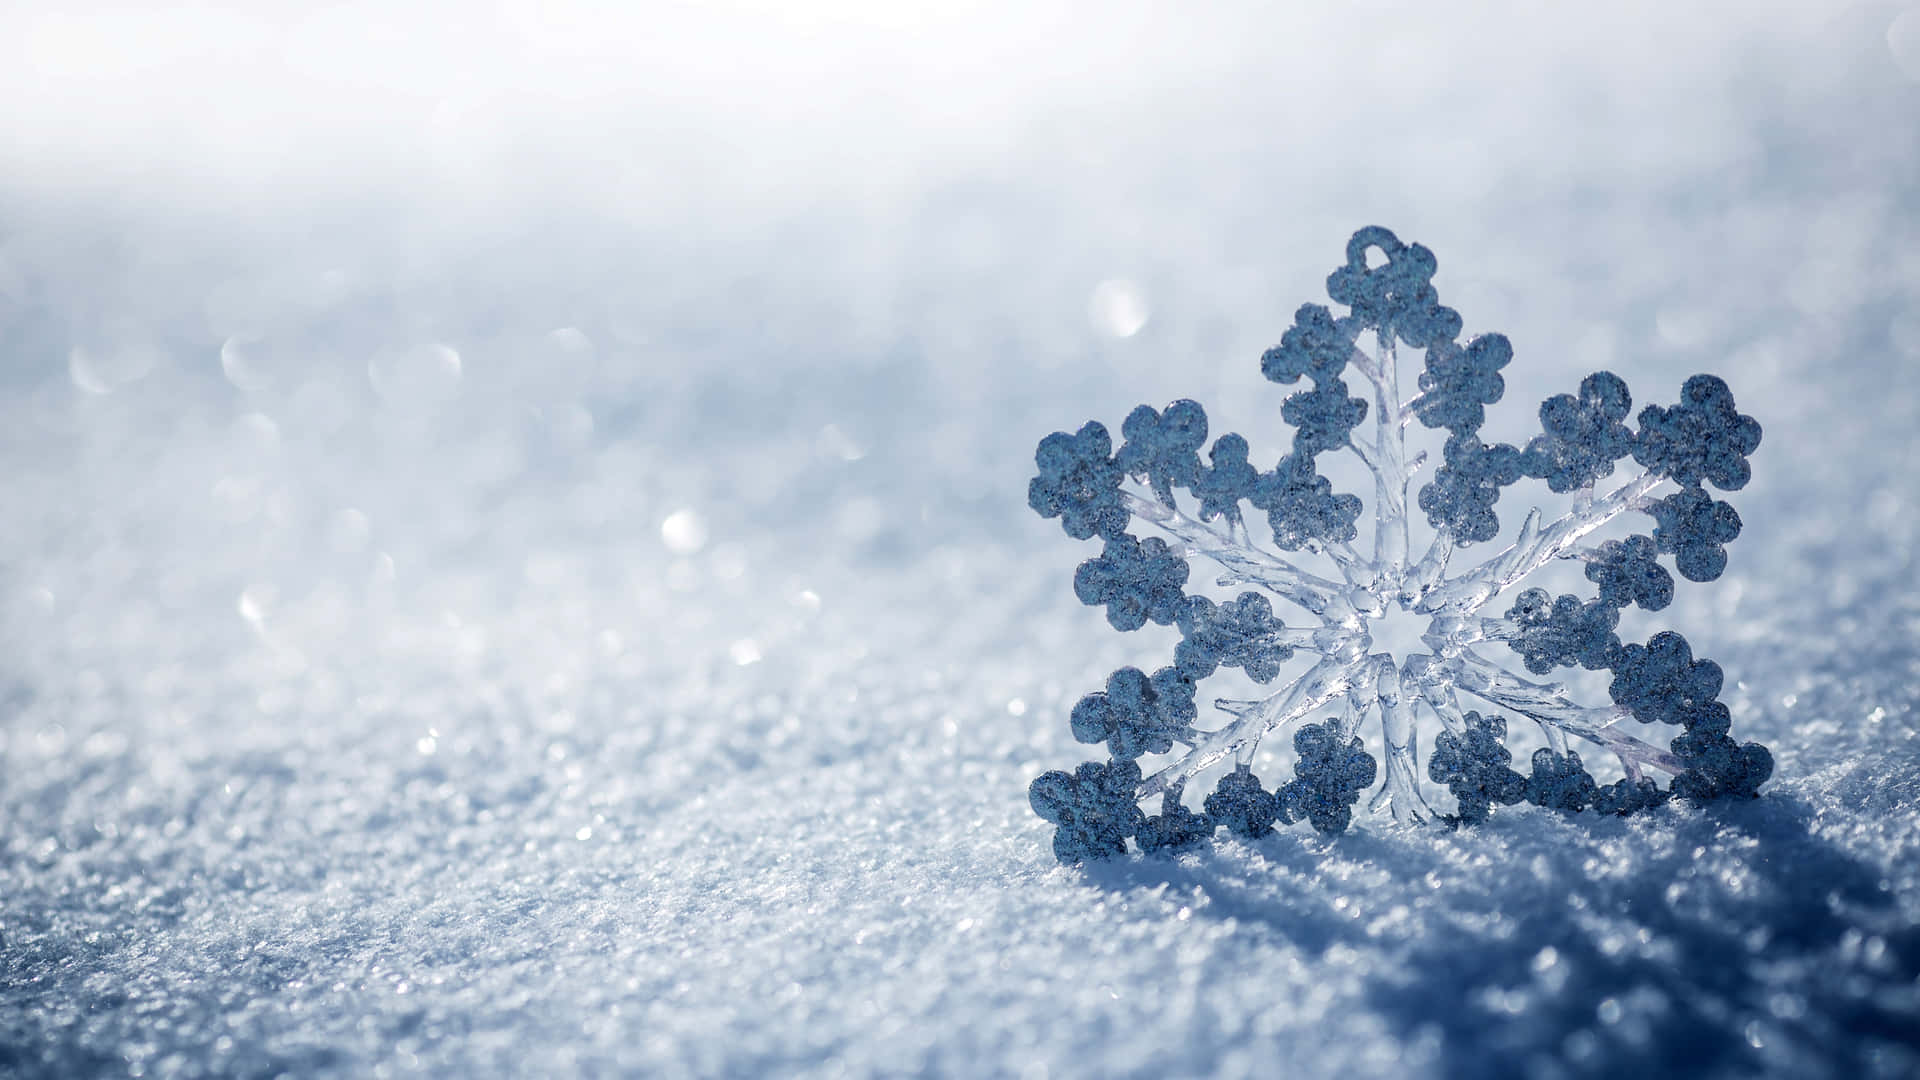 Nature's Perfect Creation - A Snowflake